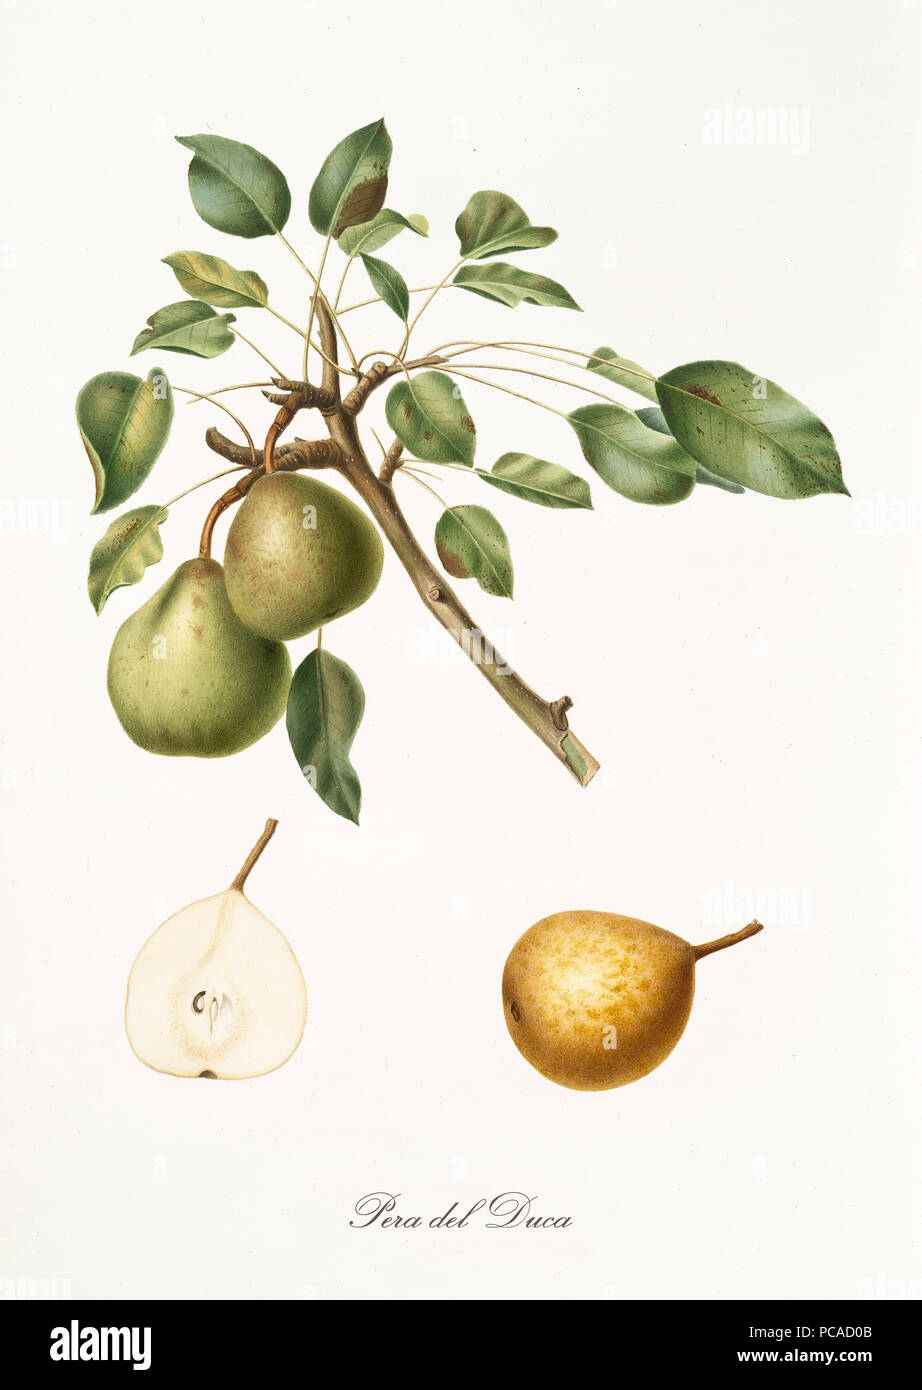 Pear, called pear of the duke, on a single branch with leaves and isolated single pear section on white background. Old botanical illustration realized by Giorgio Gallesio on 1817,1839 Stock Photo